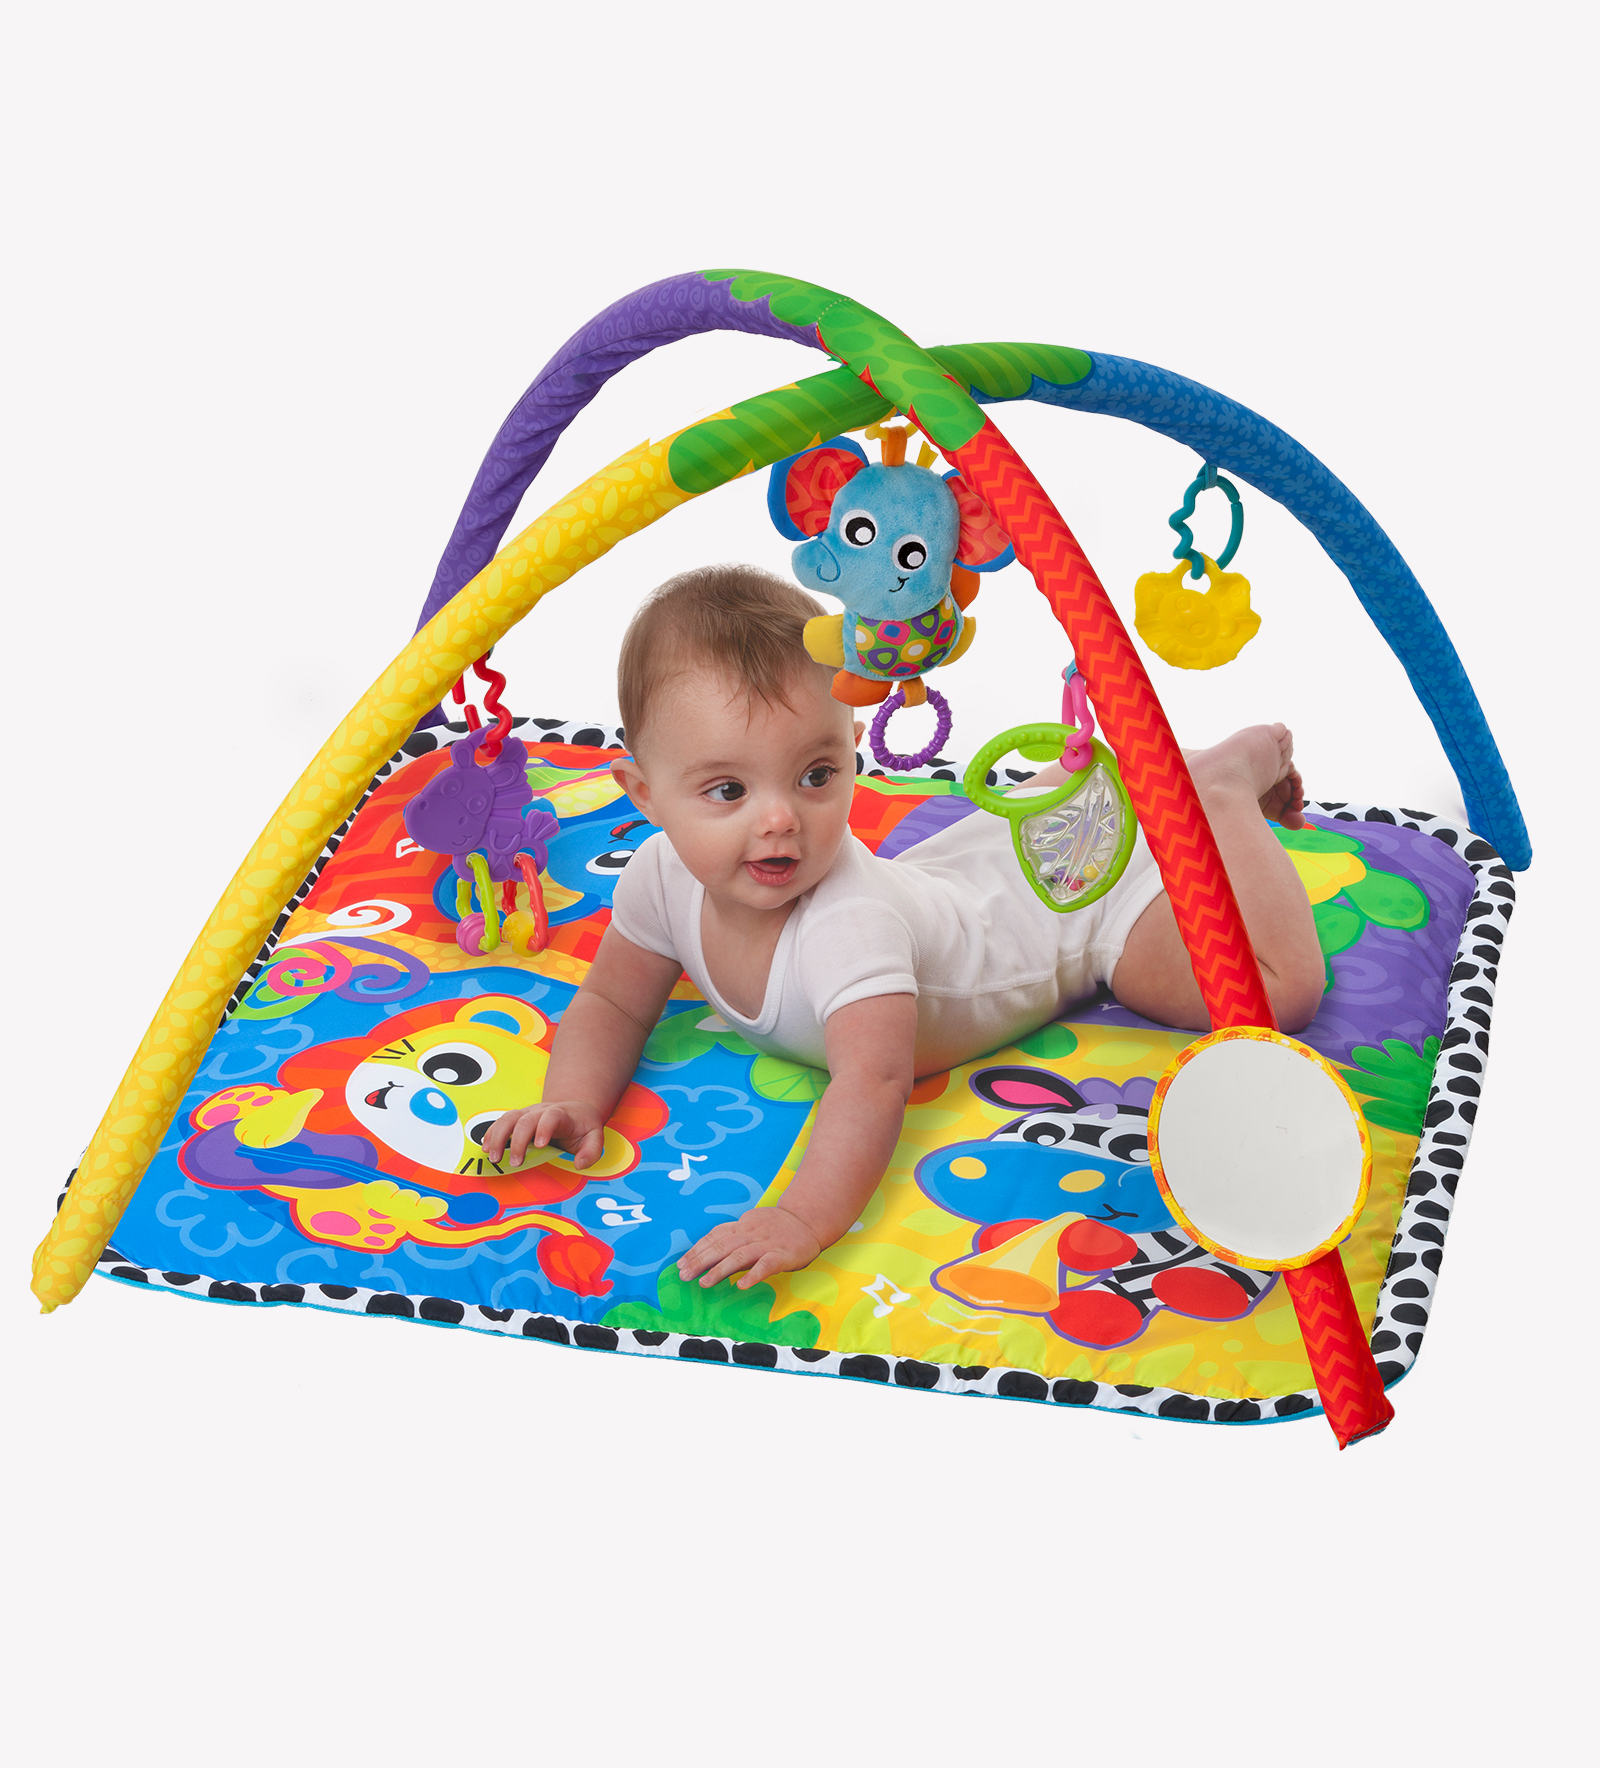 Lights Blue WYSWYG Baby Gym Jungle Musical Play Mats for Floor Kick and Play Piano Gym Activity Center with Music and Sounds Toys for Infants and Toddlers Aged 0 to 6 12Months Old 